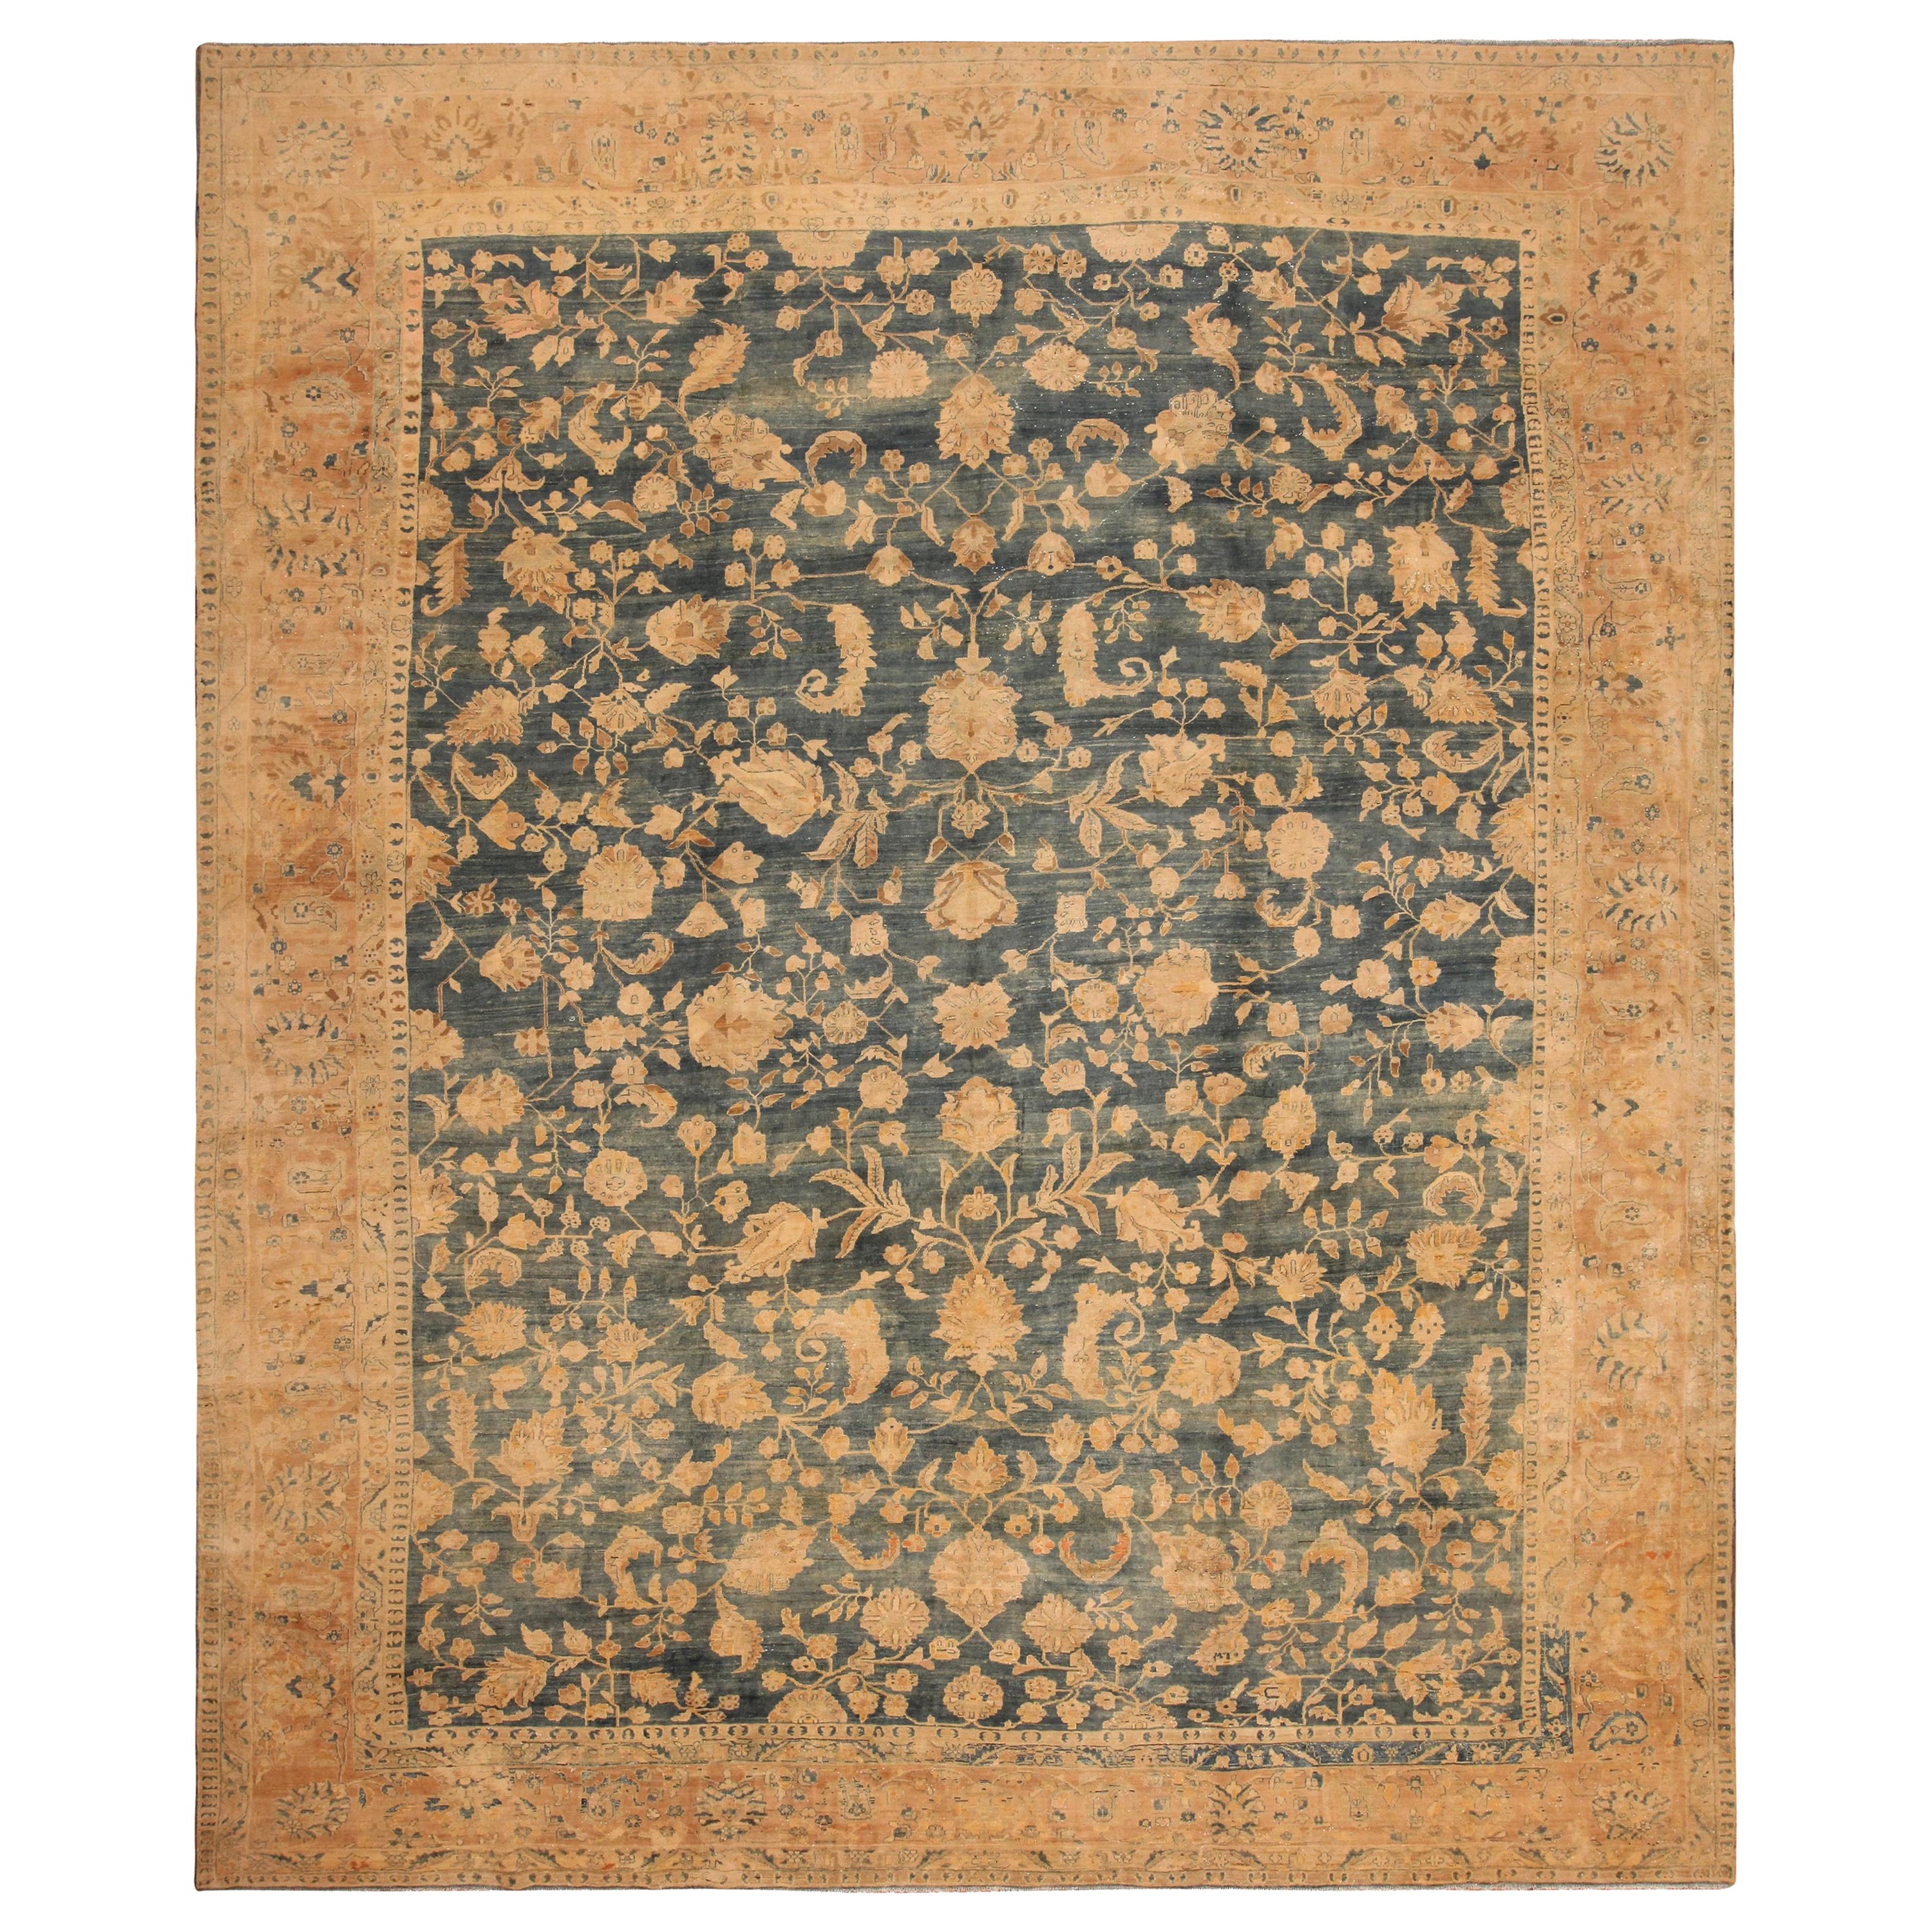 Nazmiyal Collection Antique Persian Khorassan Rug. Size: 12 ft 4 in x 15 ft 7 in